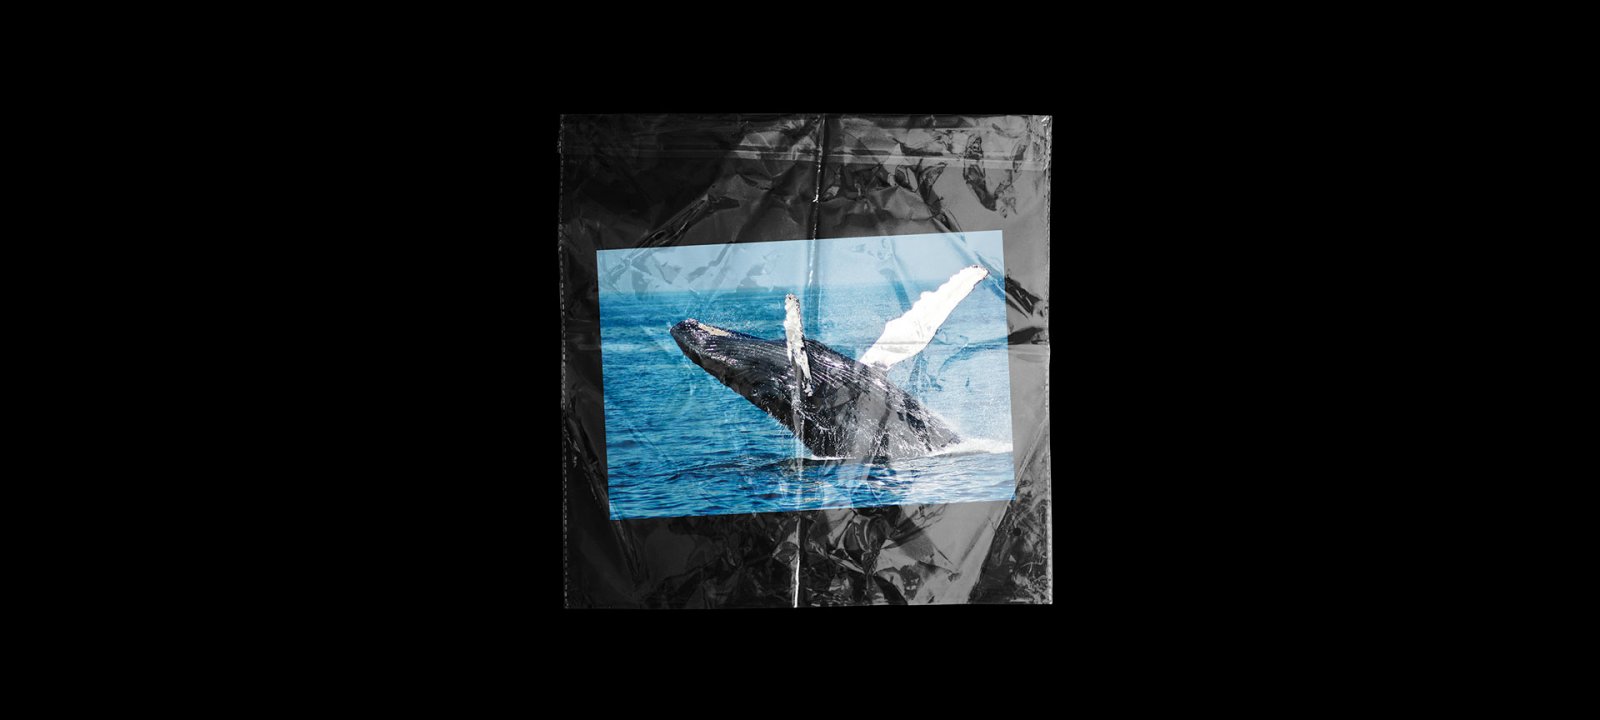 Photo of a whale, the image is wrapped in plastic